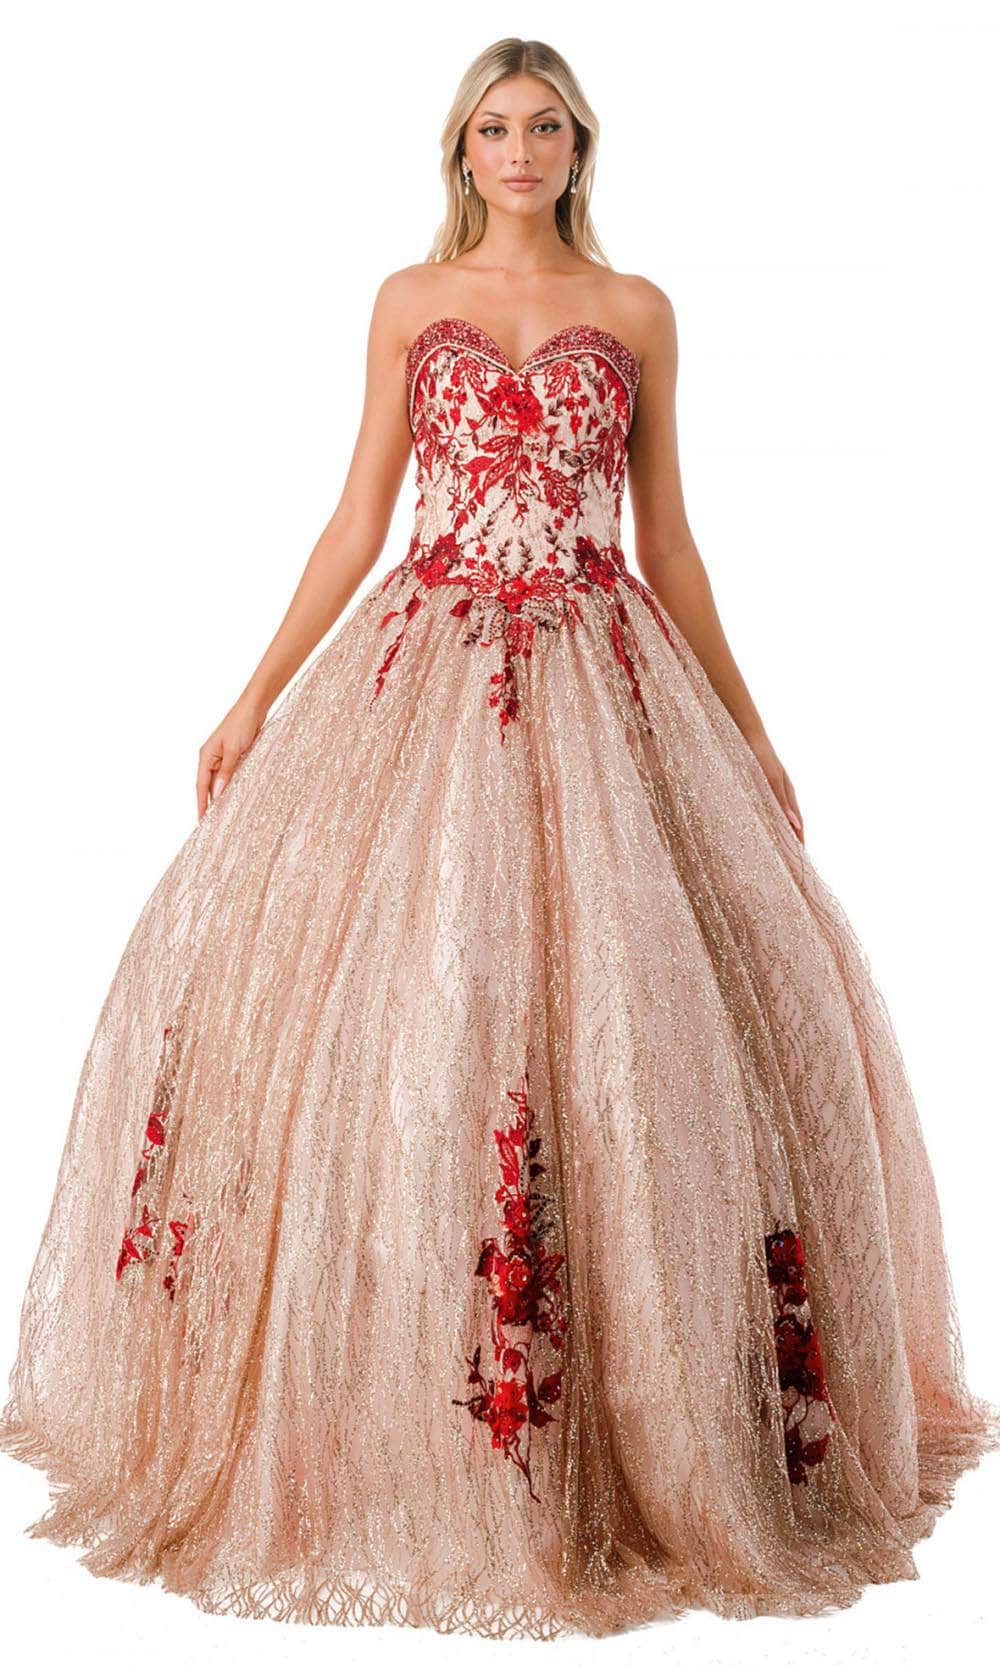 Image of Aspeed Design L2730 - Sweetheart Strapless Ballgown